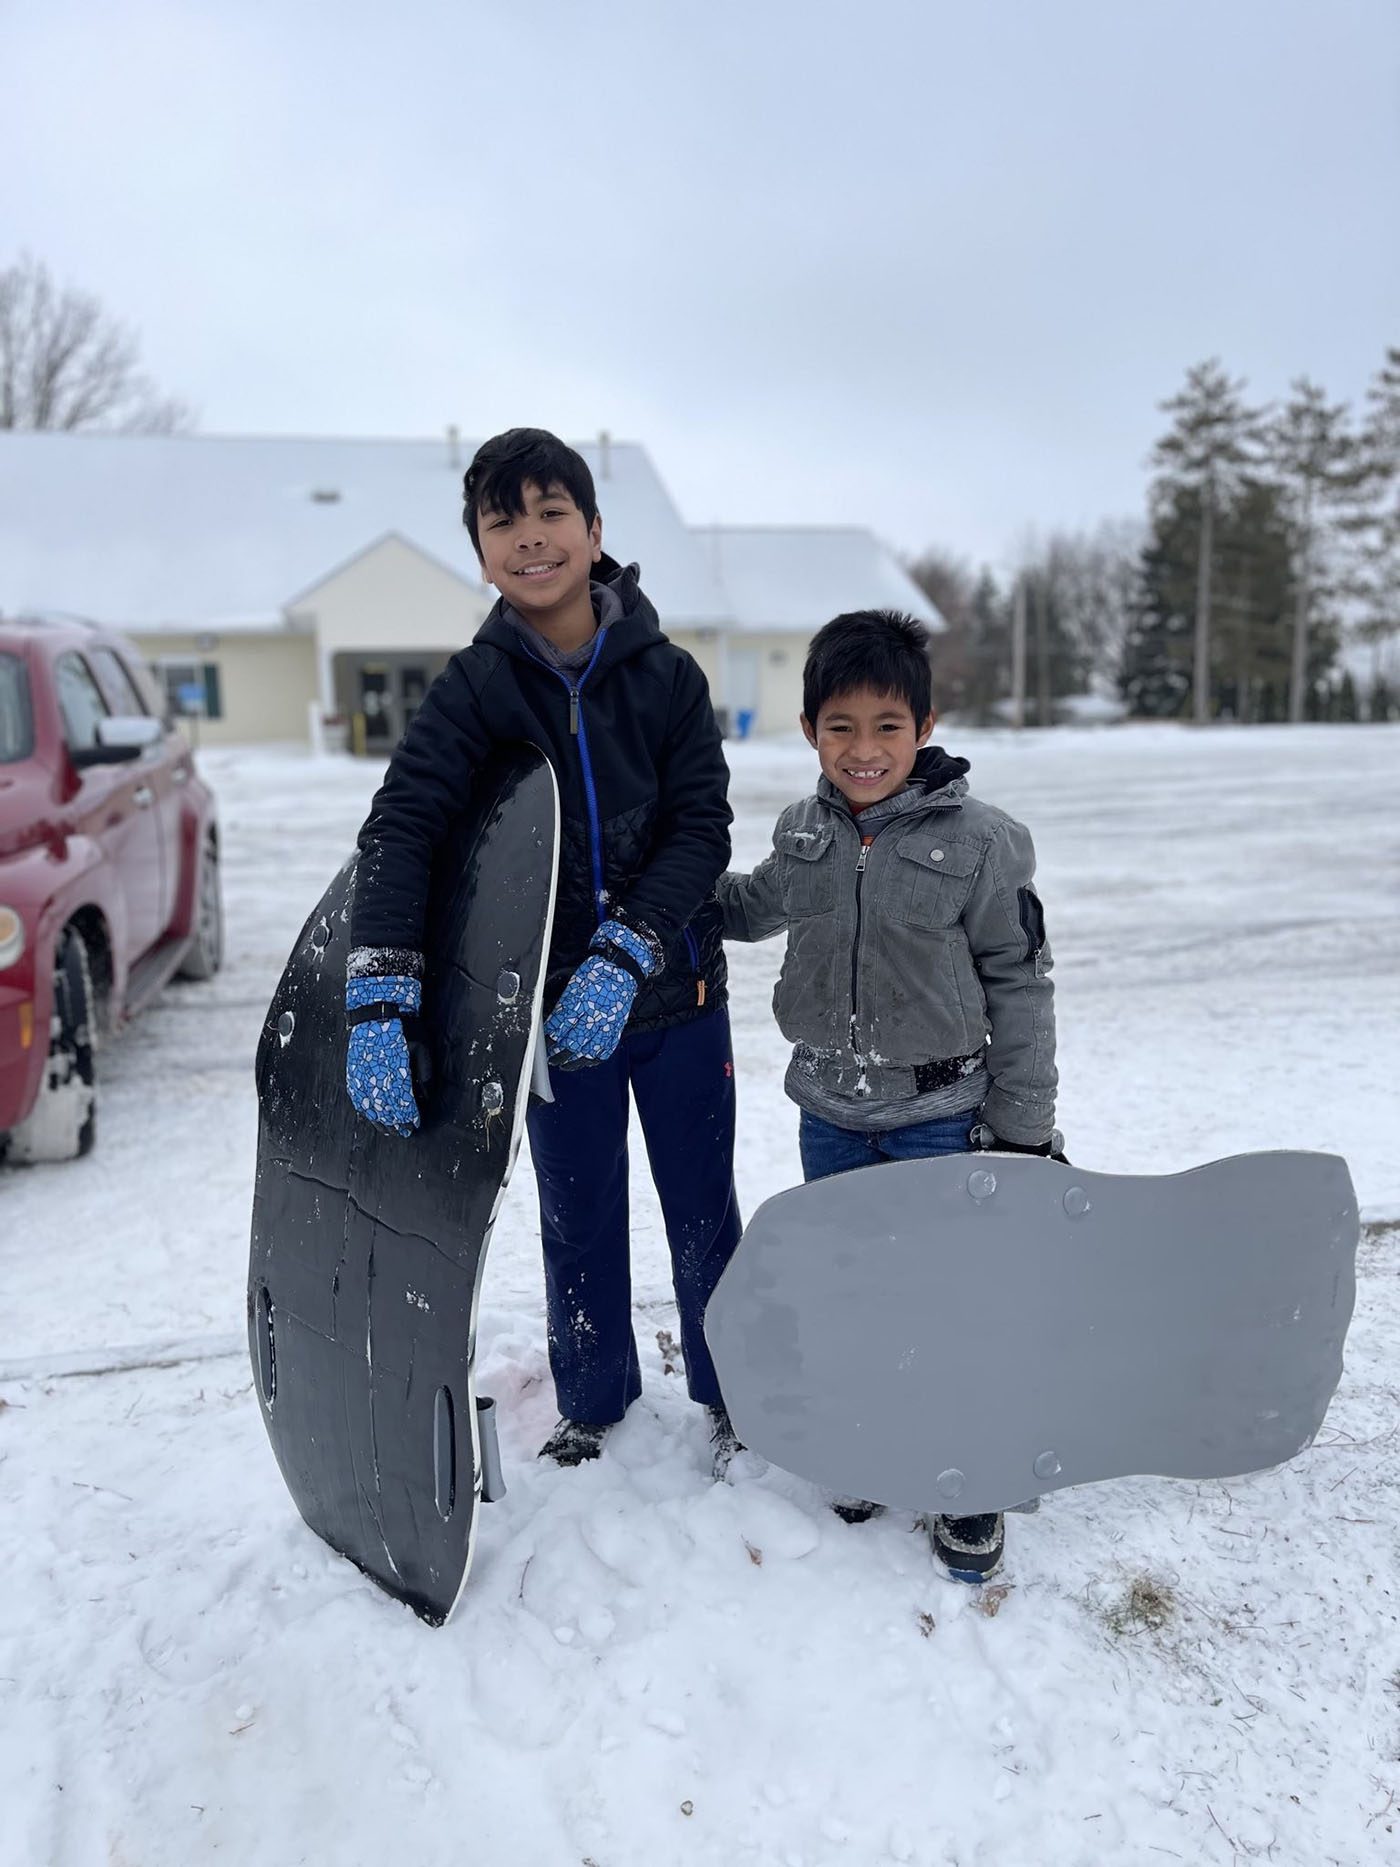 Two boys hold sleds in snowy winter